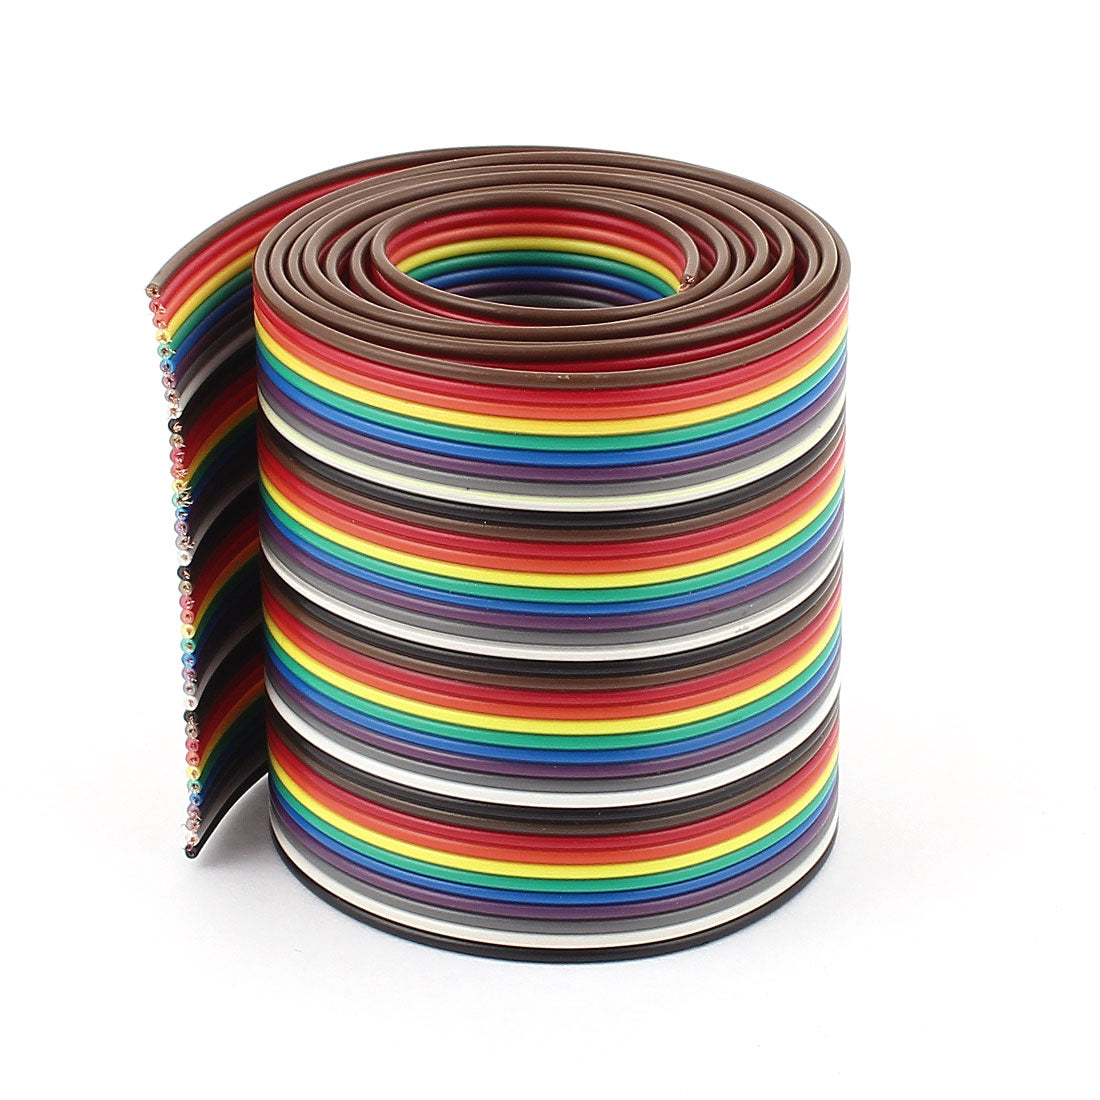 uxcell Uxcell 1m 3.3ft 40 Way Rainbow Color Flat Ribbon Cable IDC Wire 1.27mm for Arduino DIY